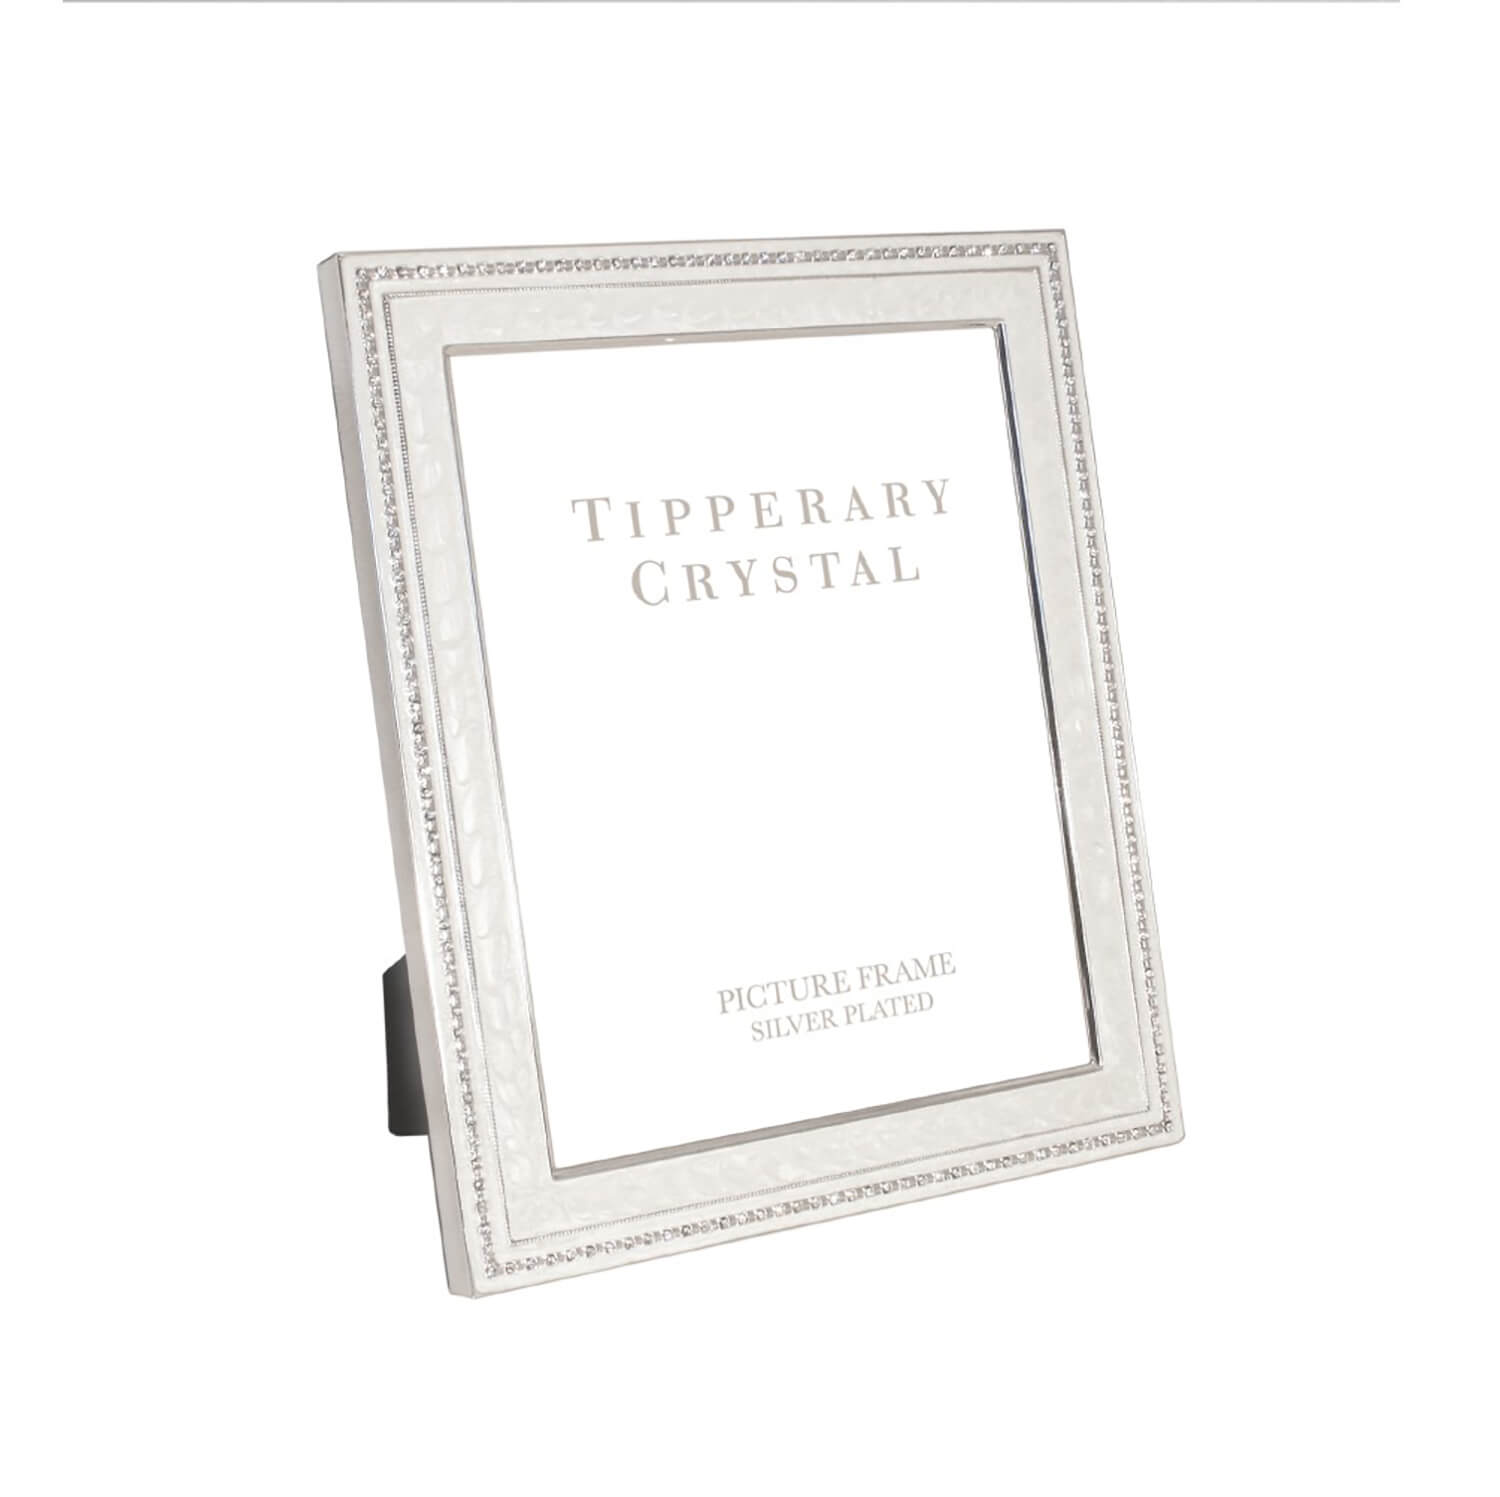 Tipperary Crystal Celebrations Photo Frame - Silver 1 Shaws Department Stores